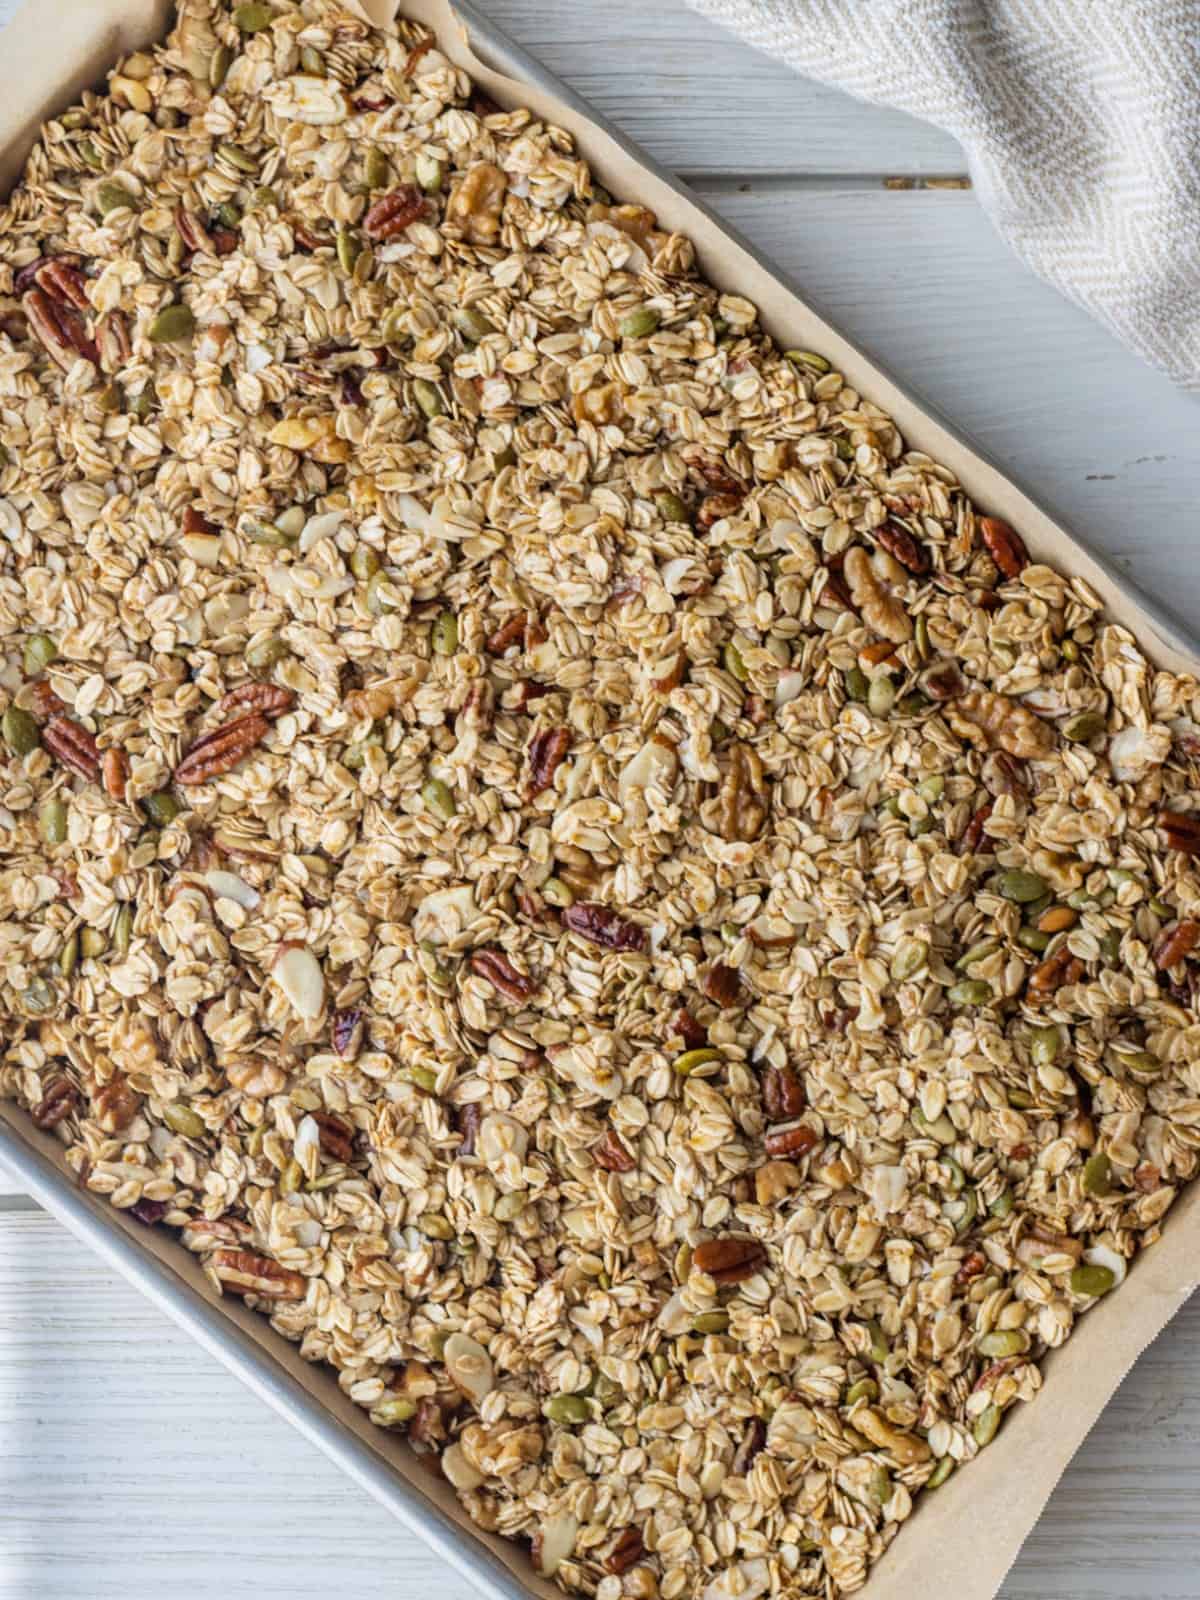 Granola on a parchment-lined baking sheet.